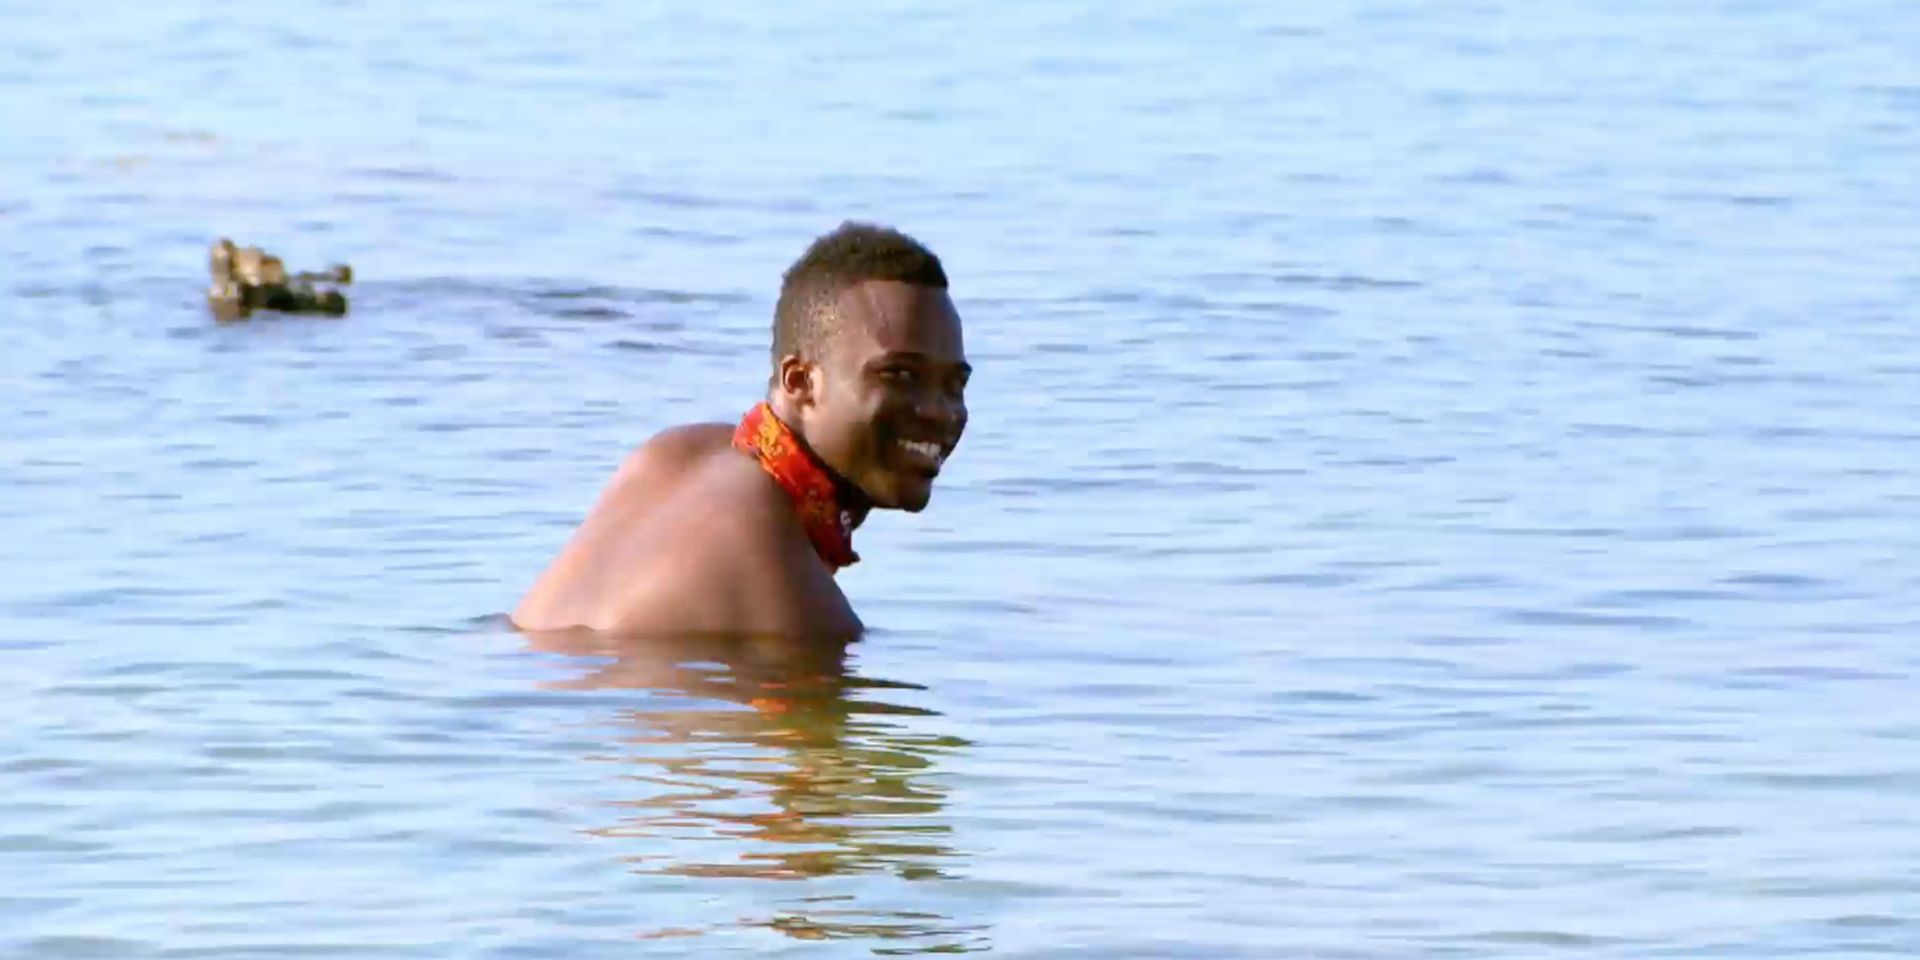 Darnell going to the bathroom in the ocean in Survivor